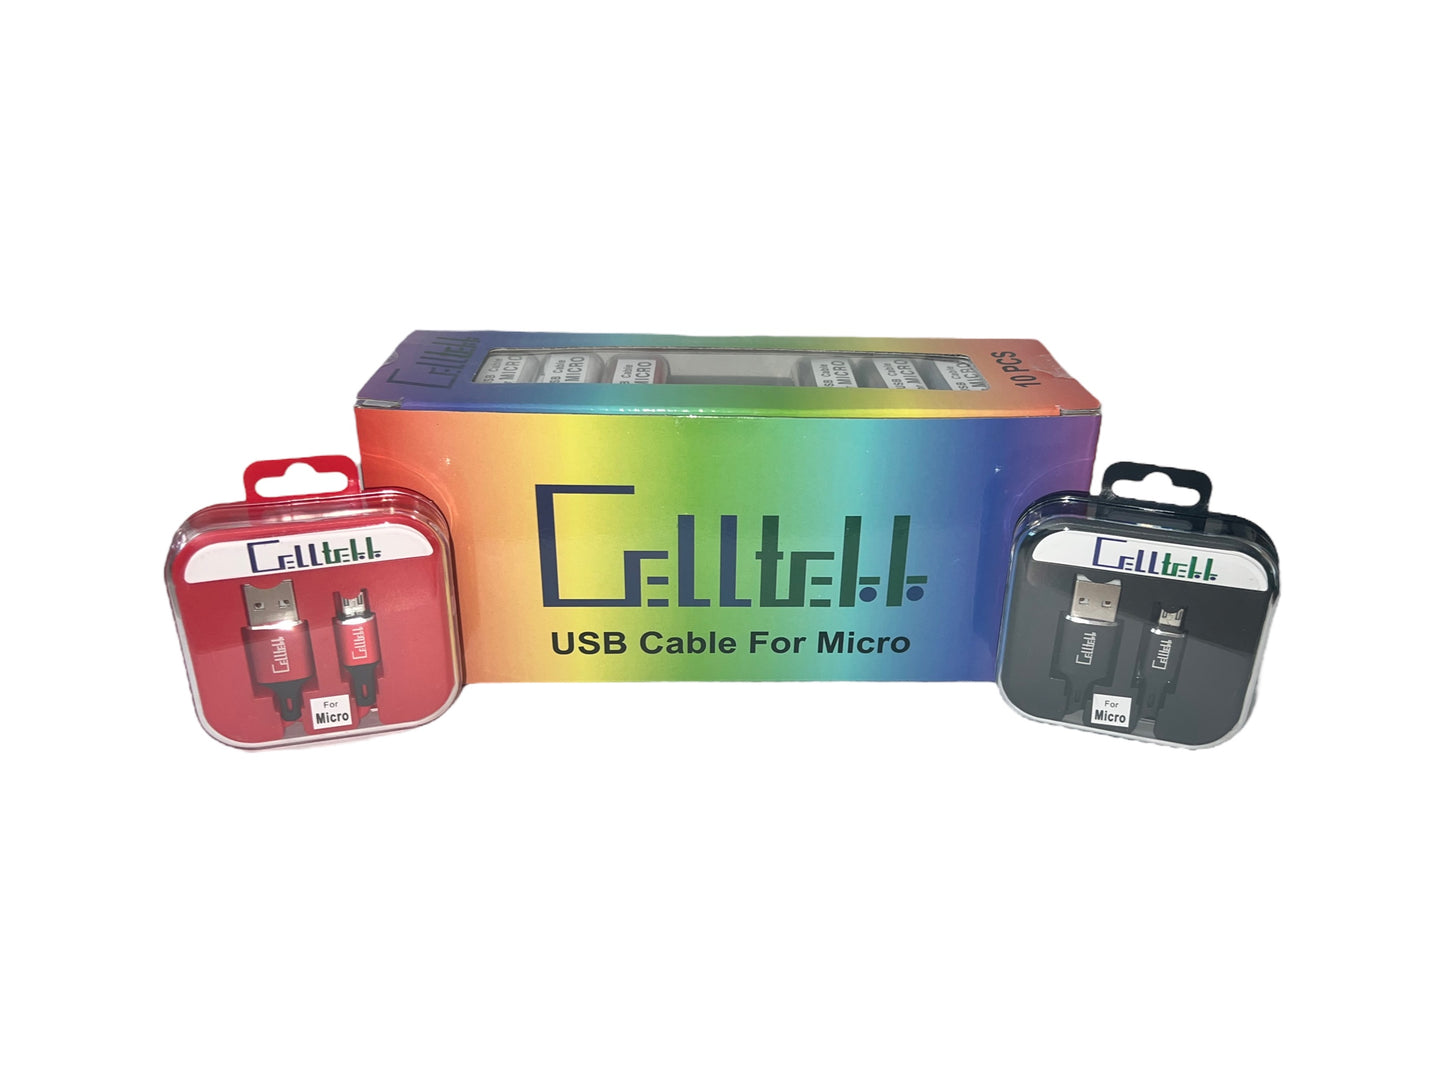 CellTell USB Cable 10ct Display